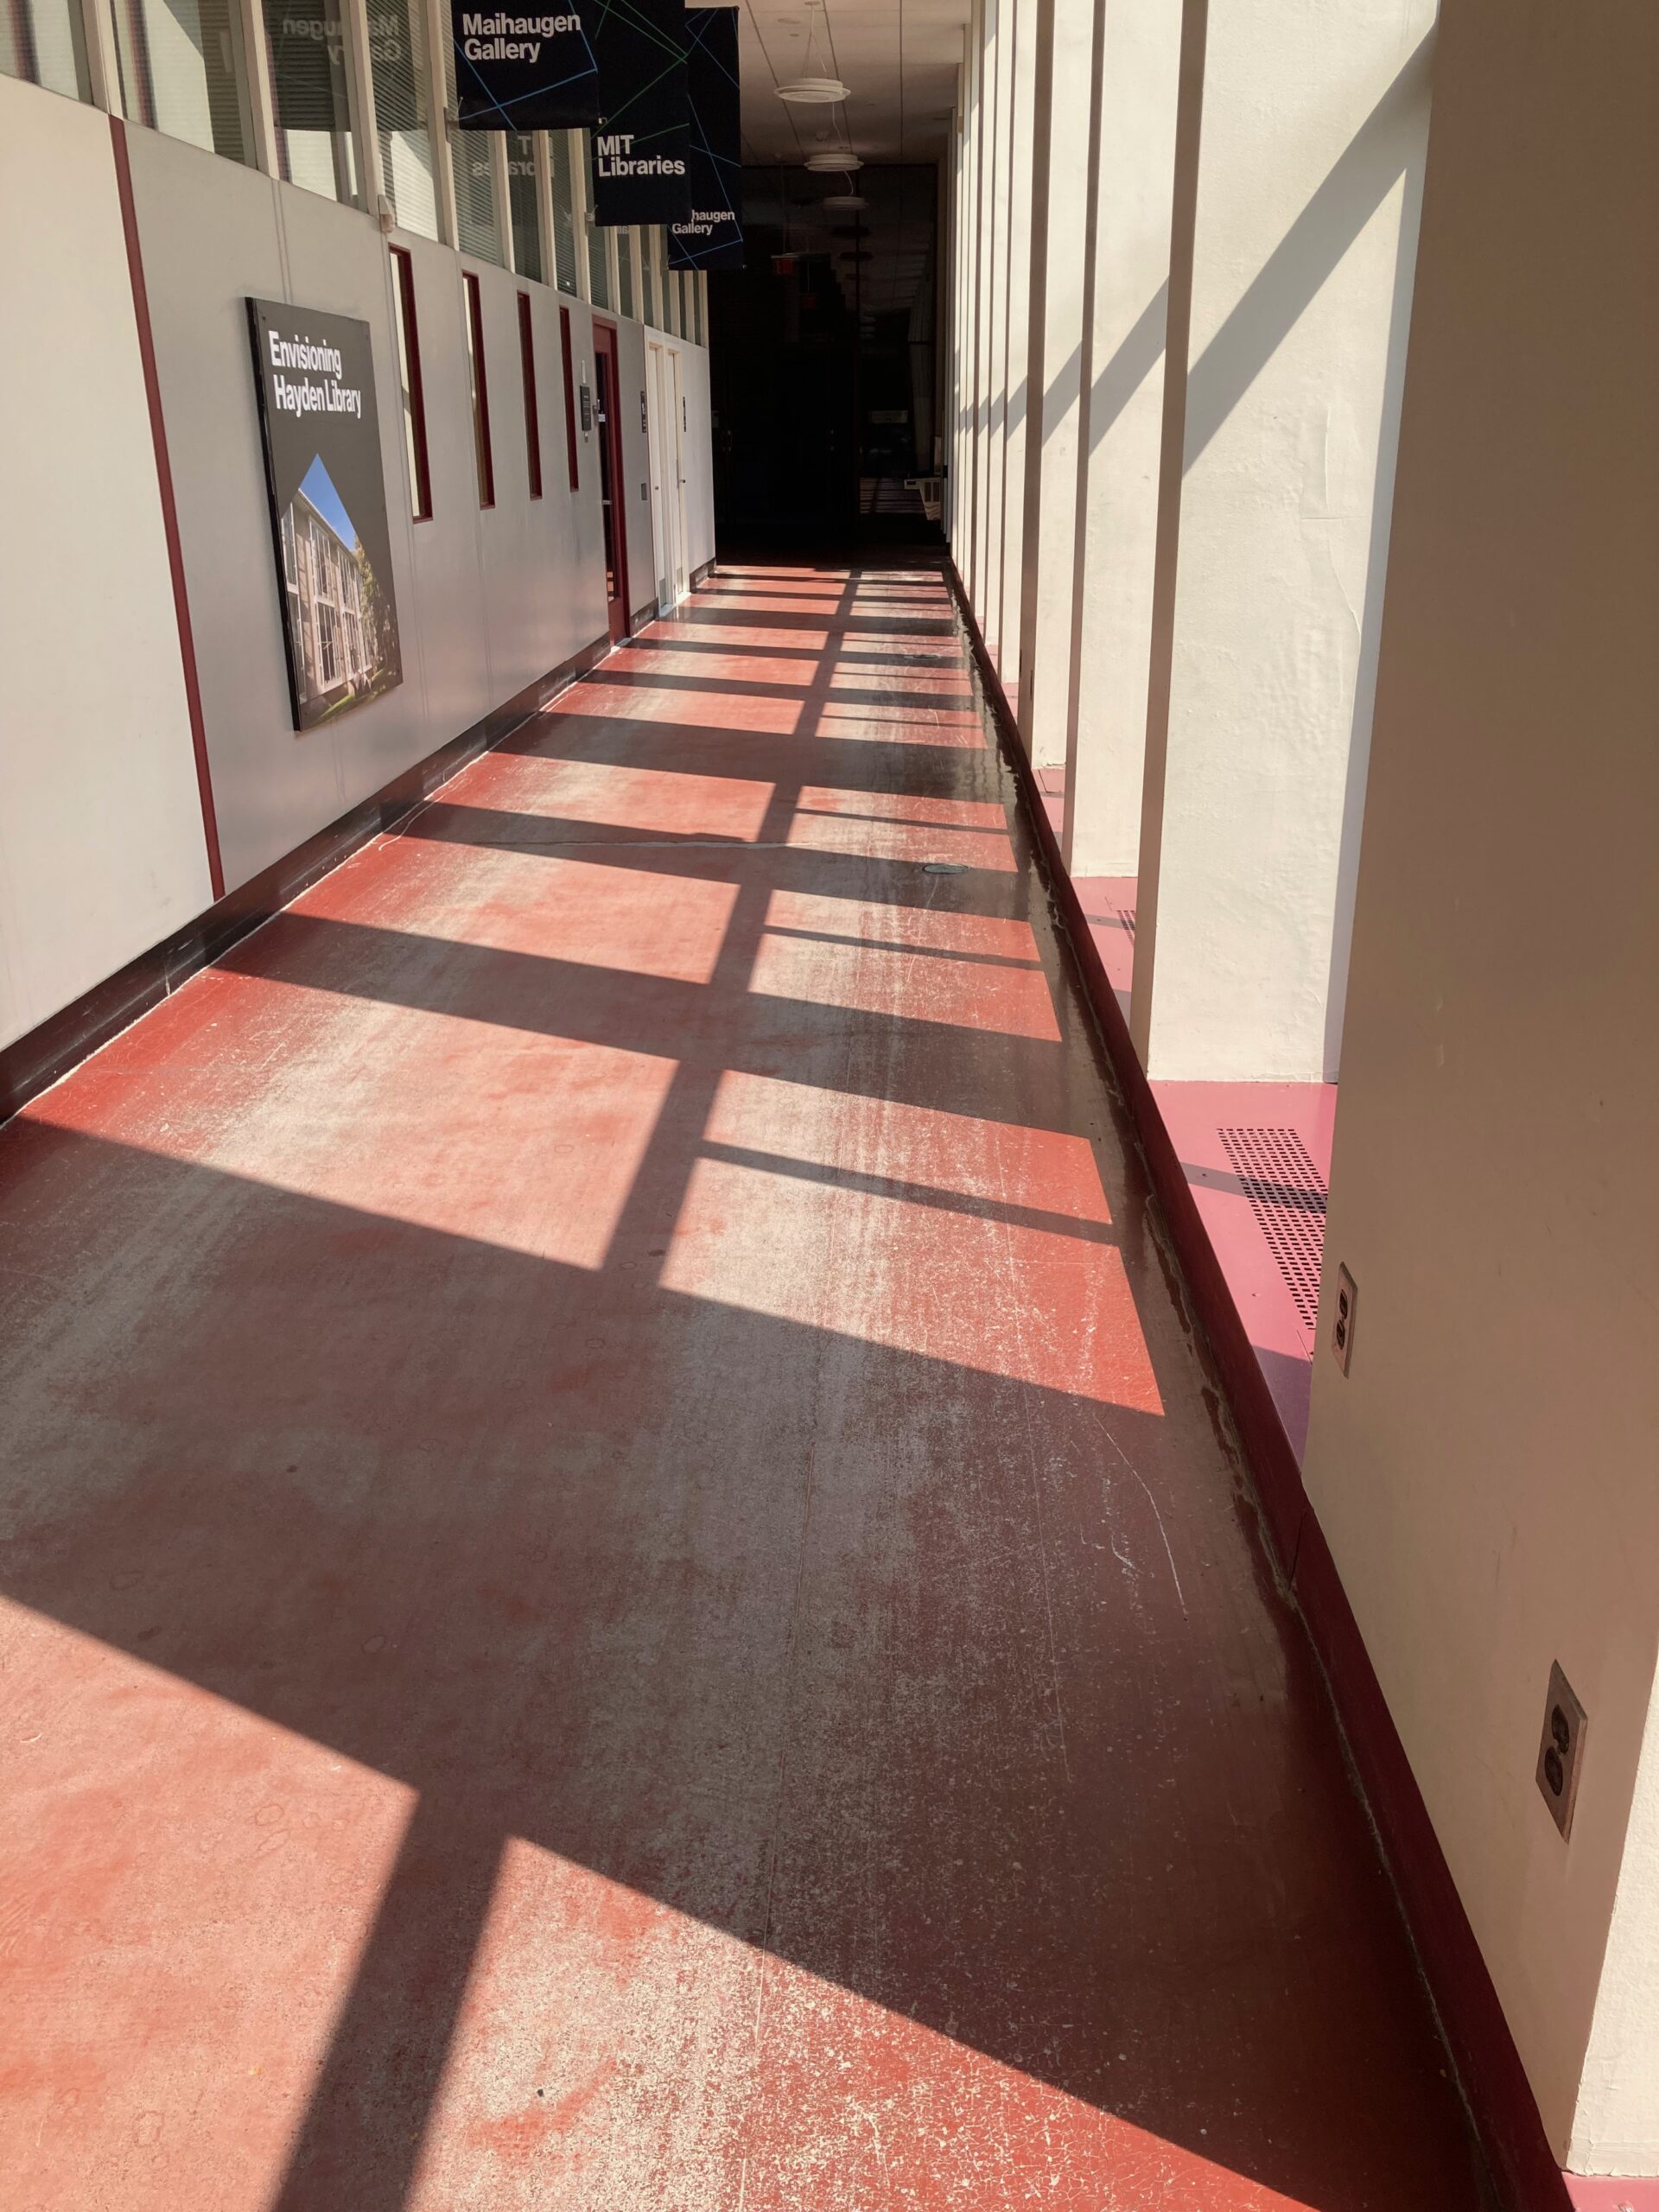 The floor of Hayden library hallway. Because of windows that are mostly not visible, light falls in square patterns on the floor.